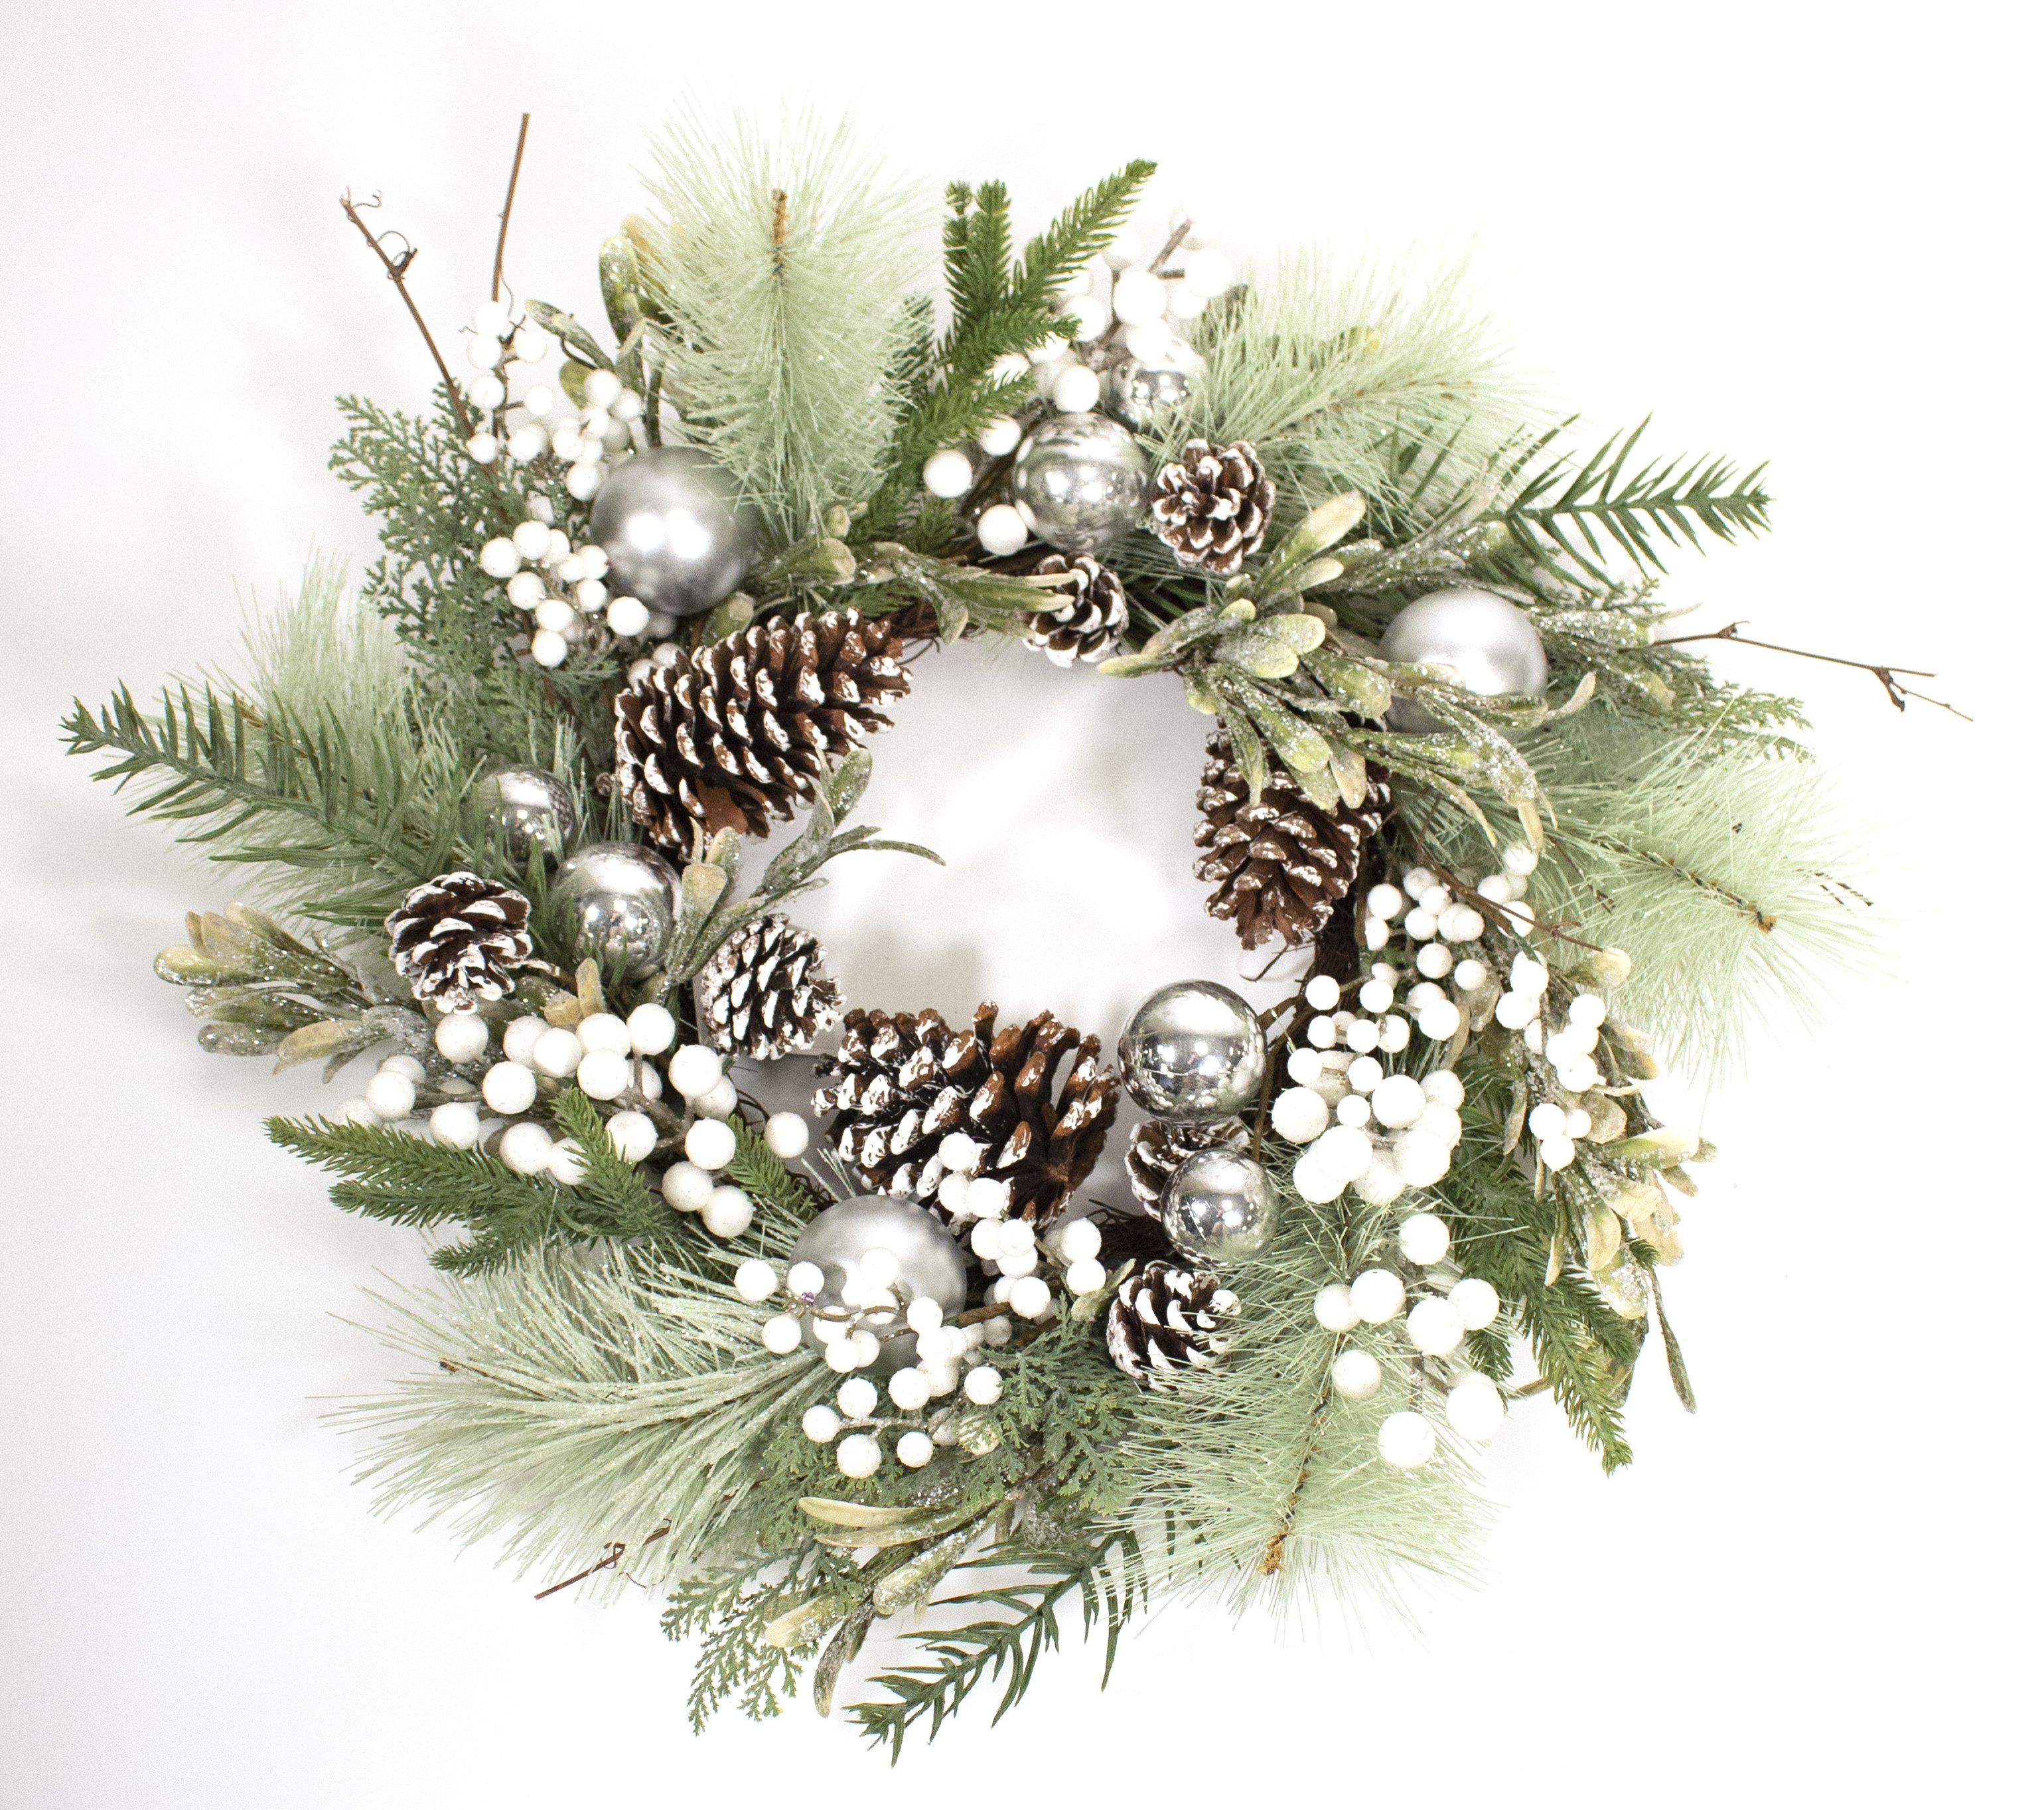 60cm White Berry and Silver Bauble Christmas Wreath